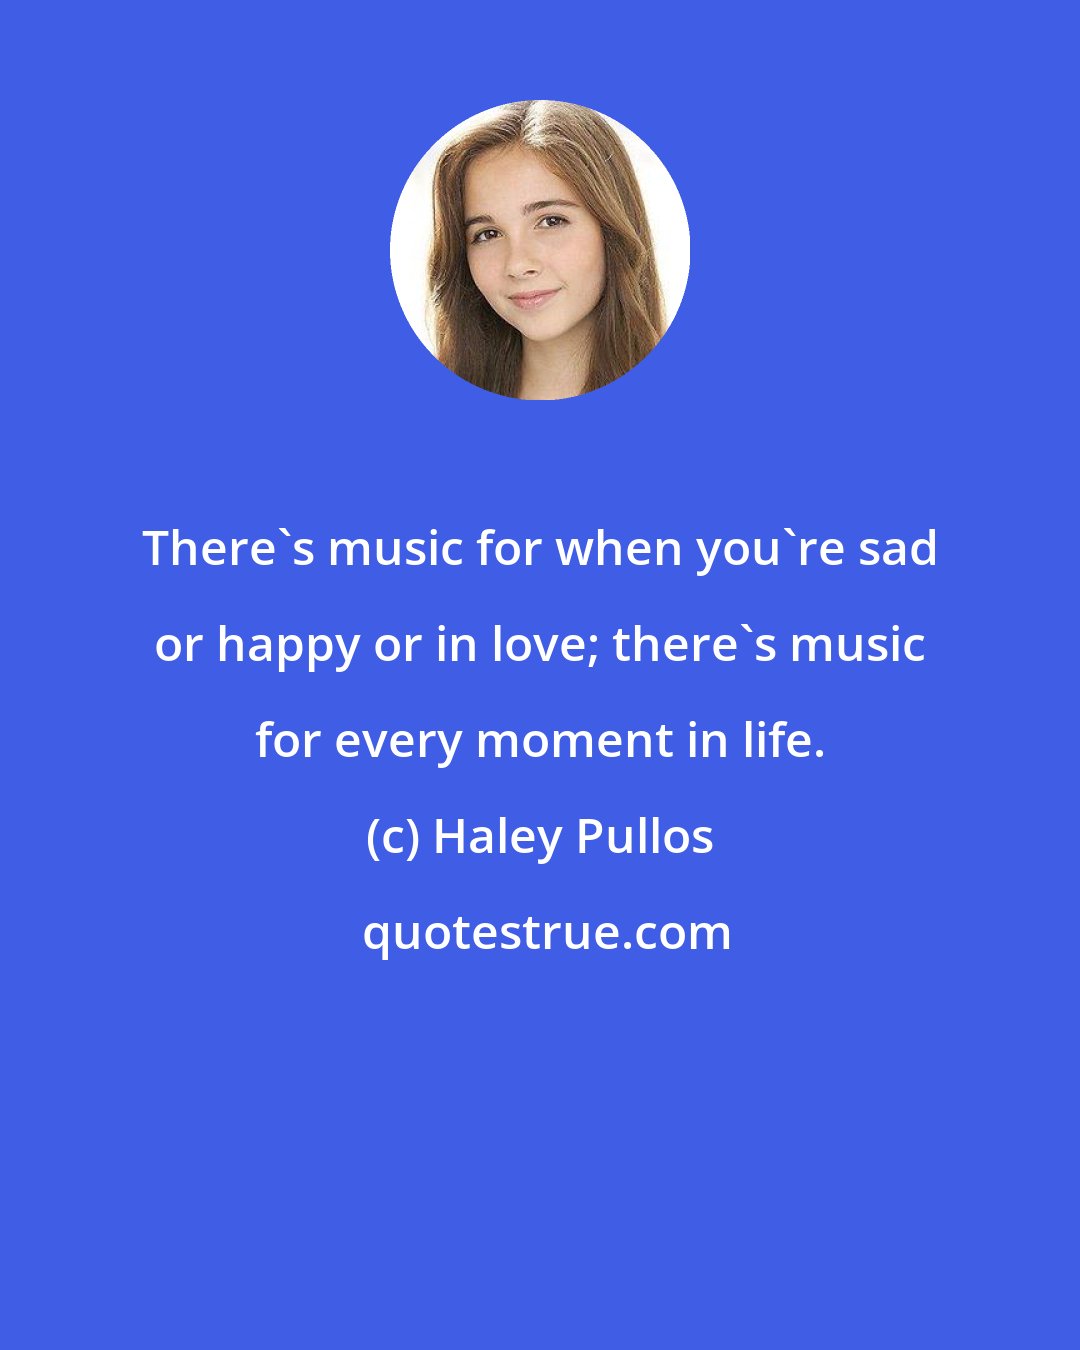 Haley Pullos: There's music for when you're sad or happy or in love; there's music for every moment in life.